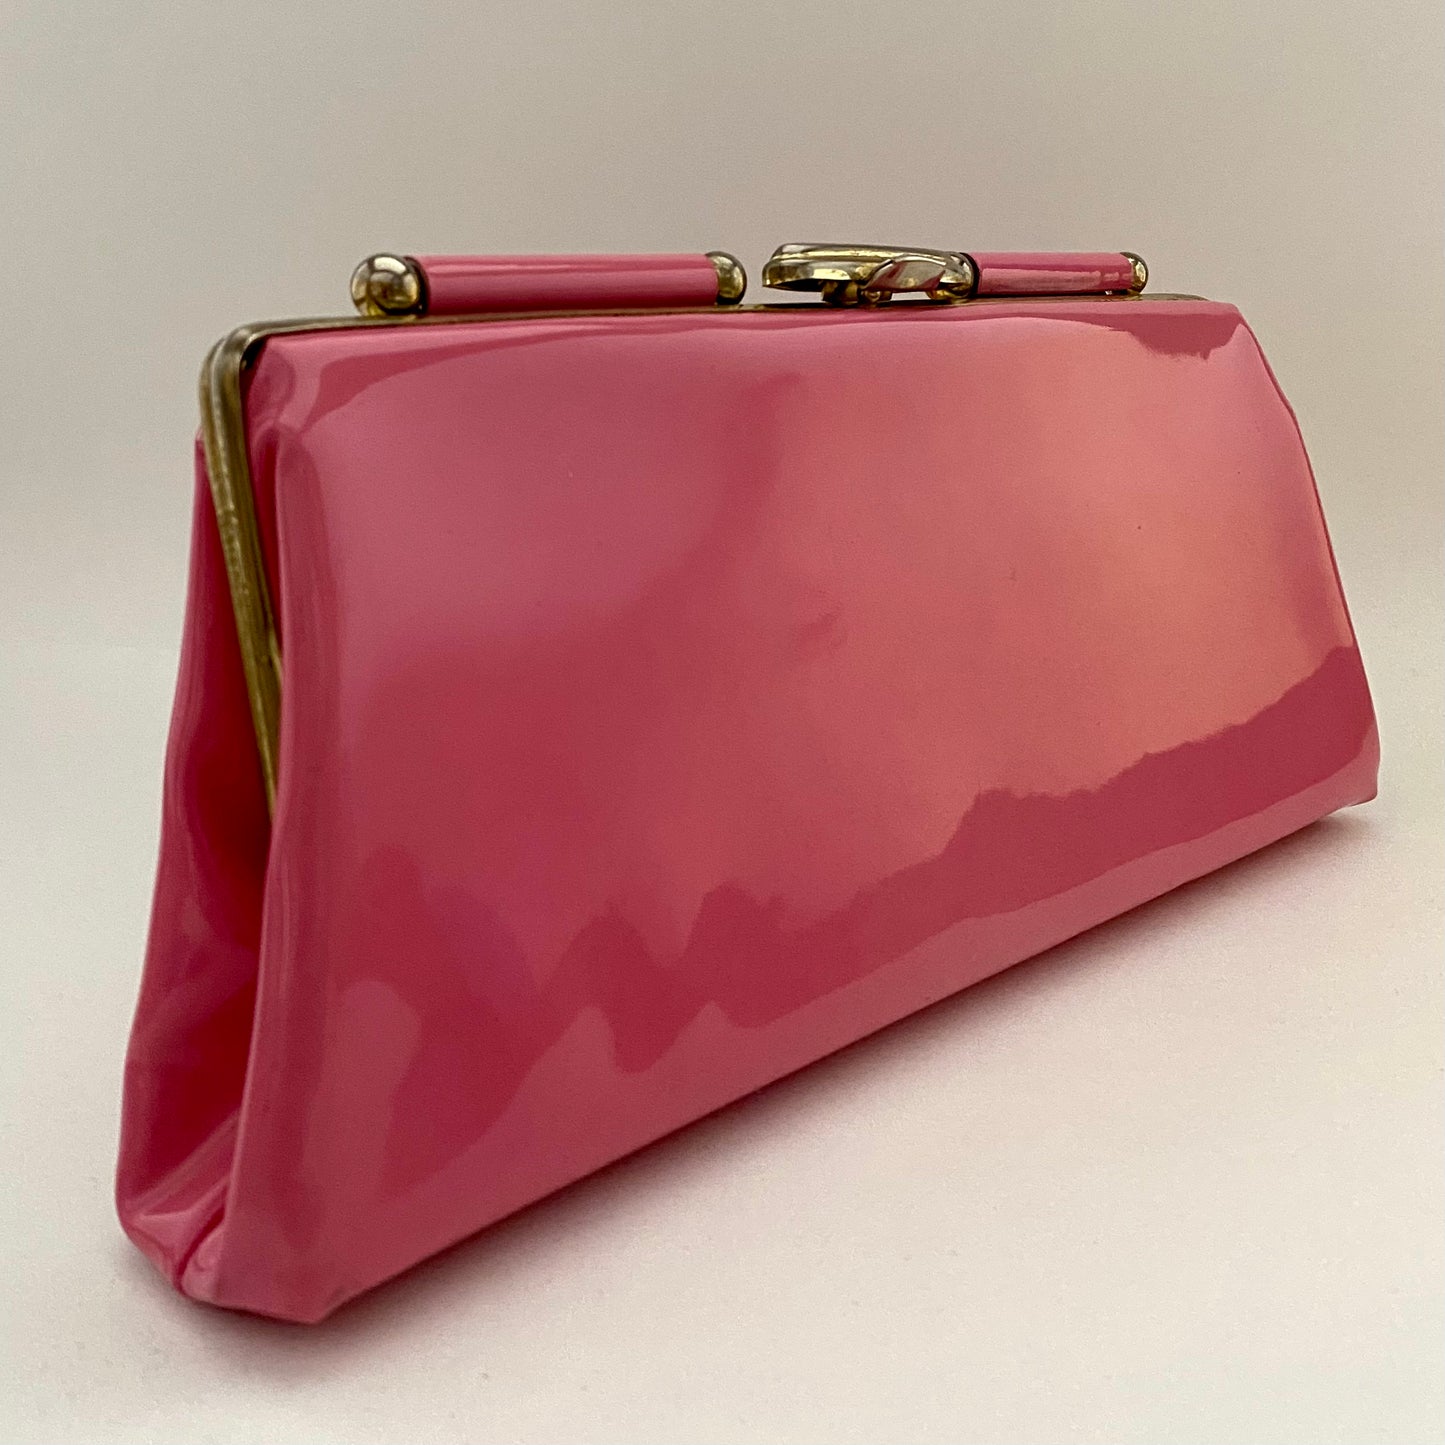 1960s Pink Patent Leather Clutch With Optional Chain Handle